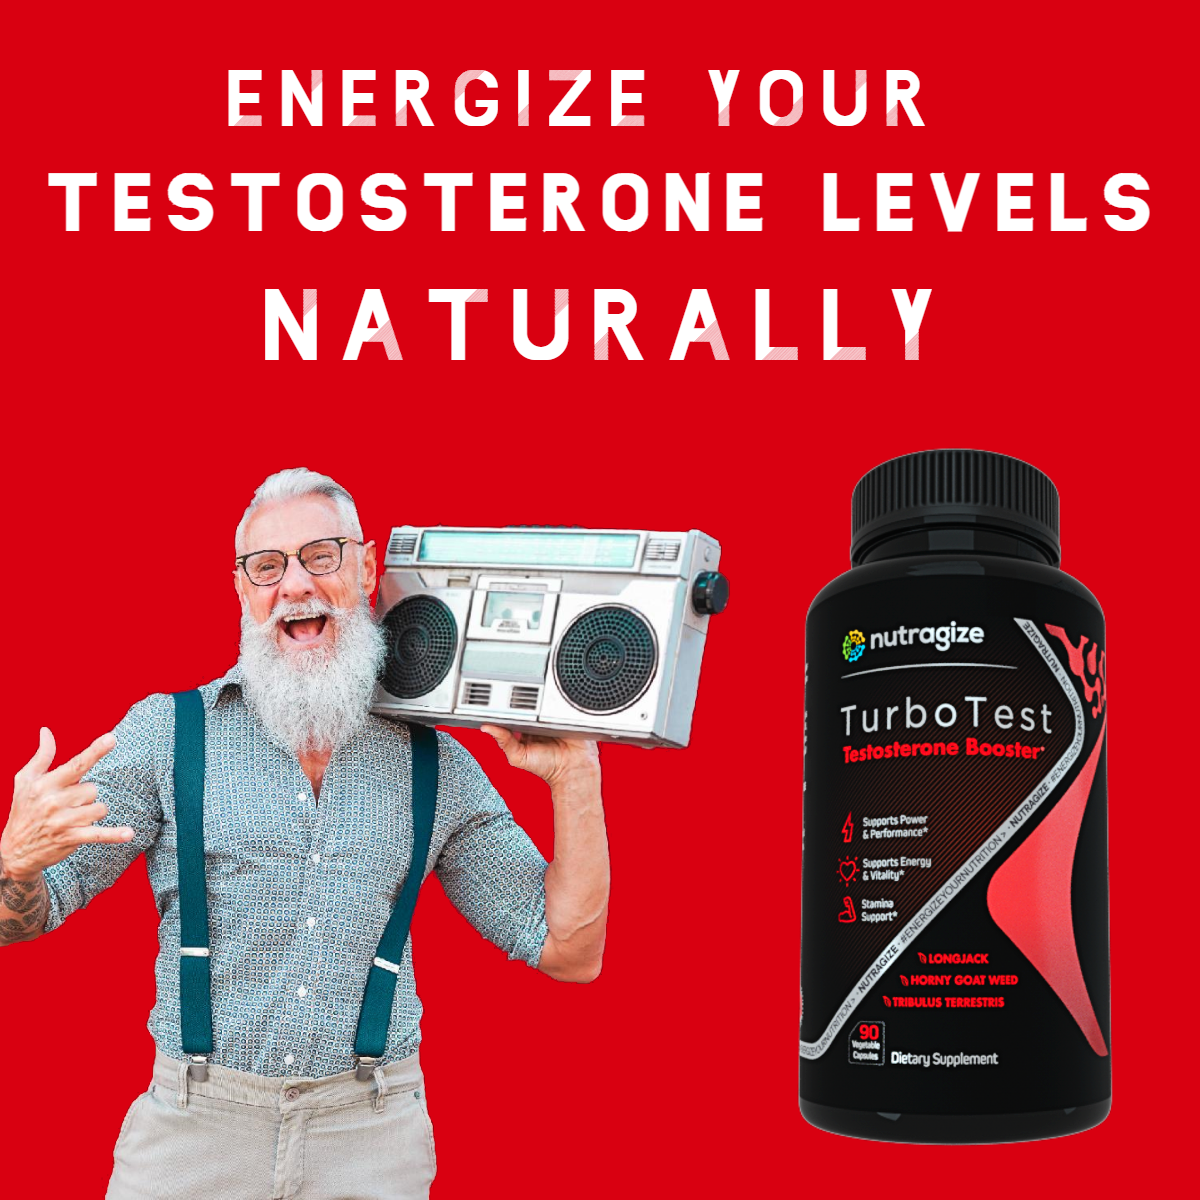 Energize Your Testosterone Levels Naturally*